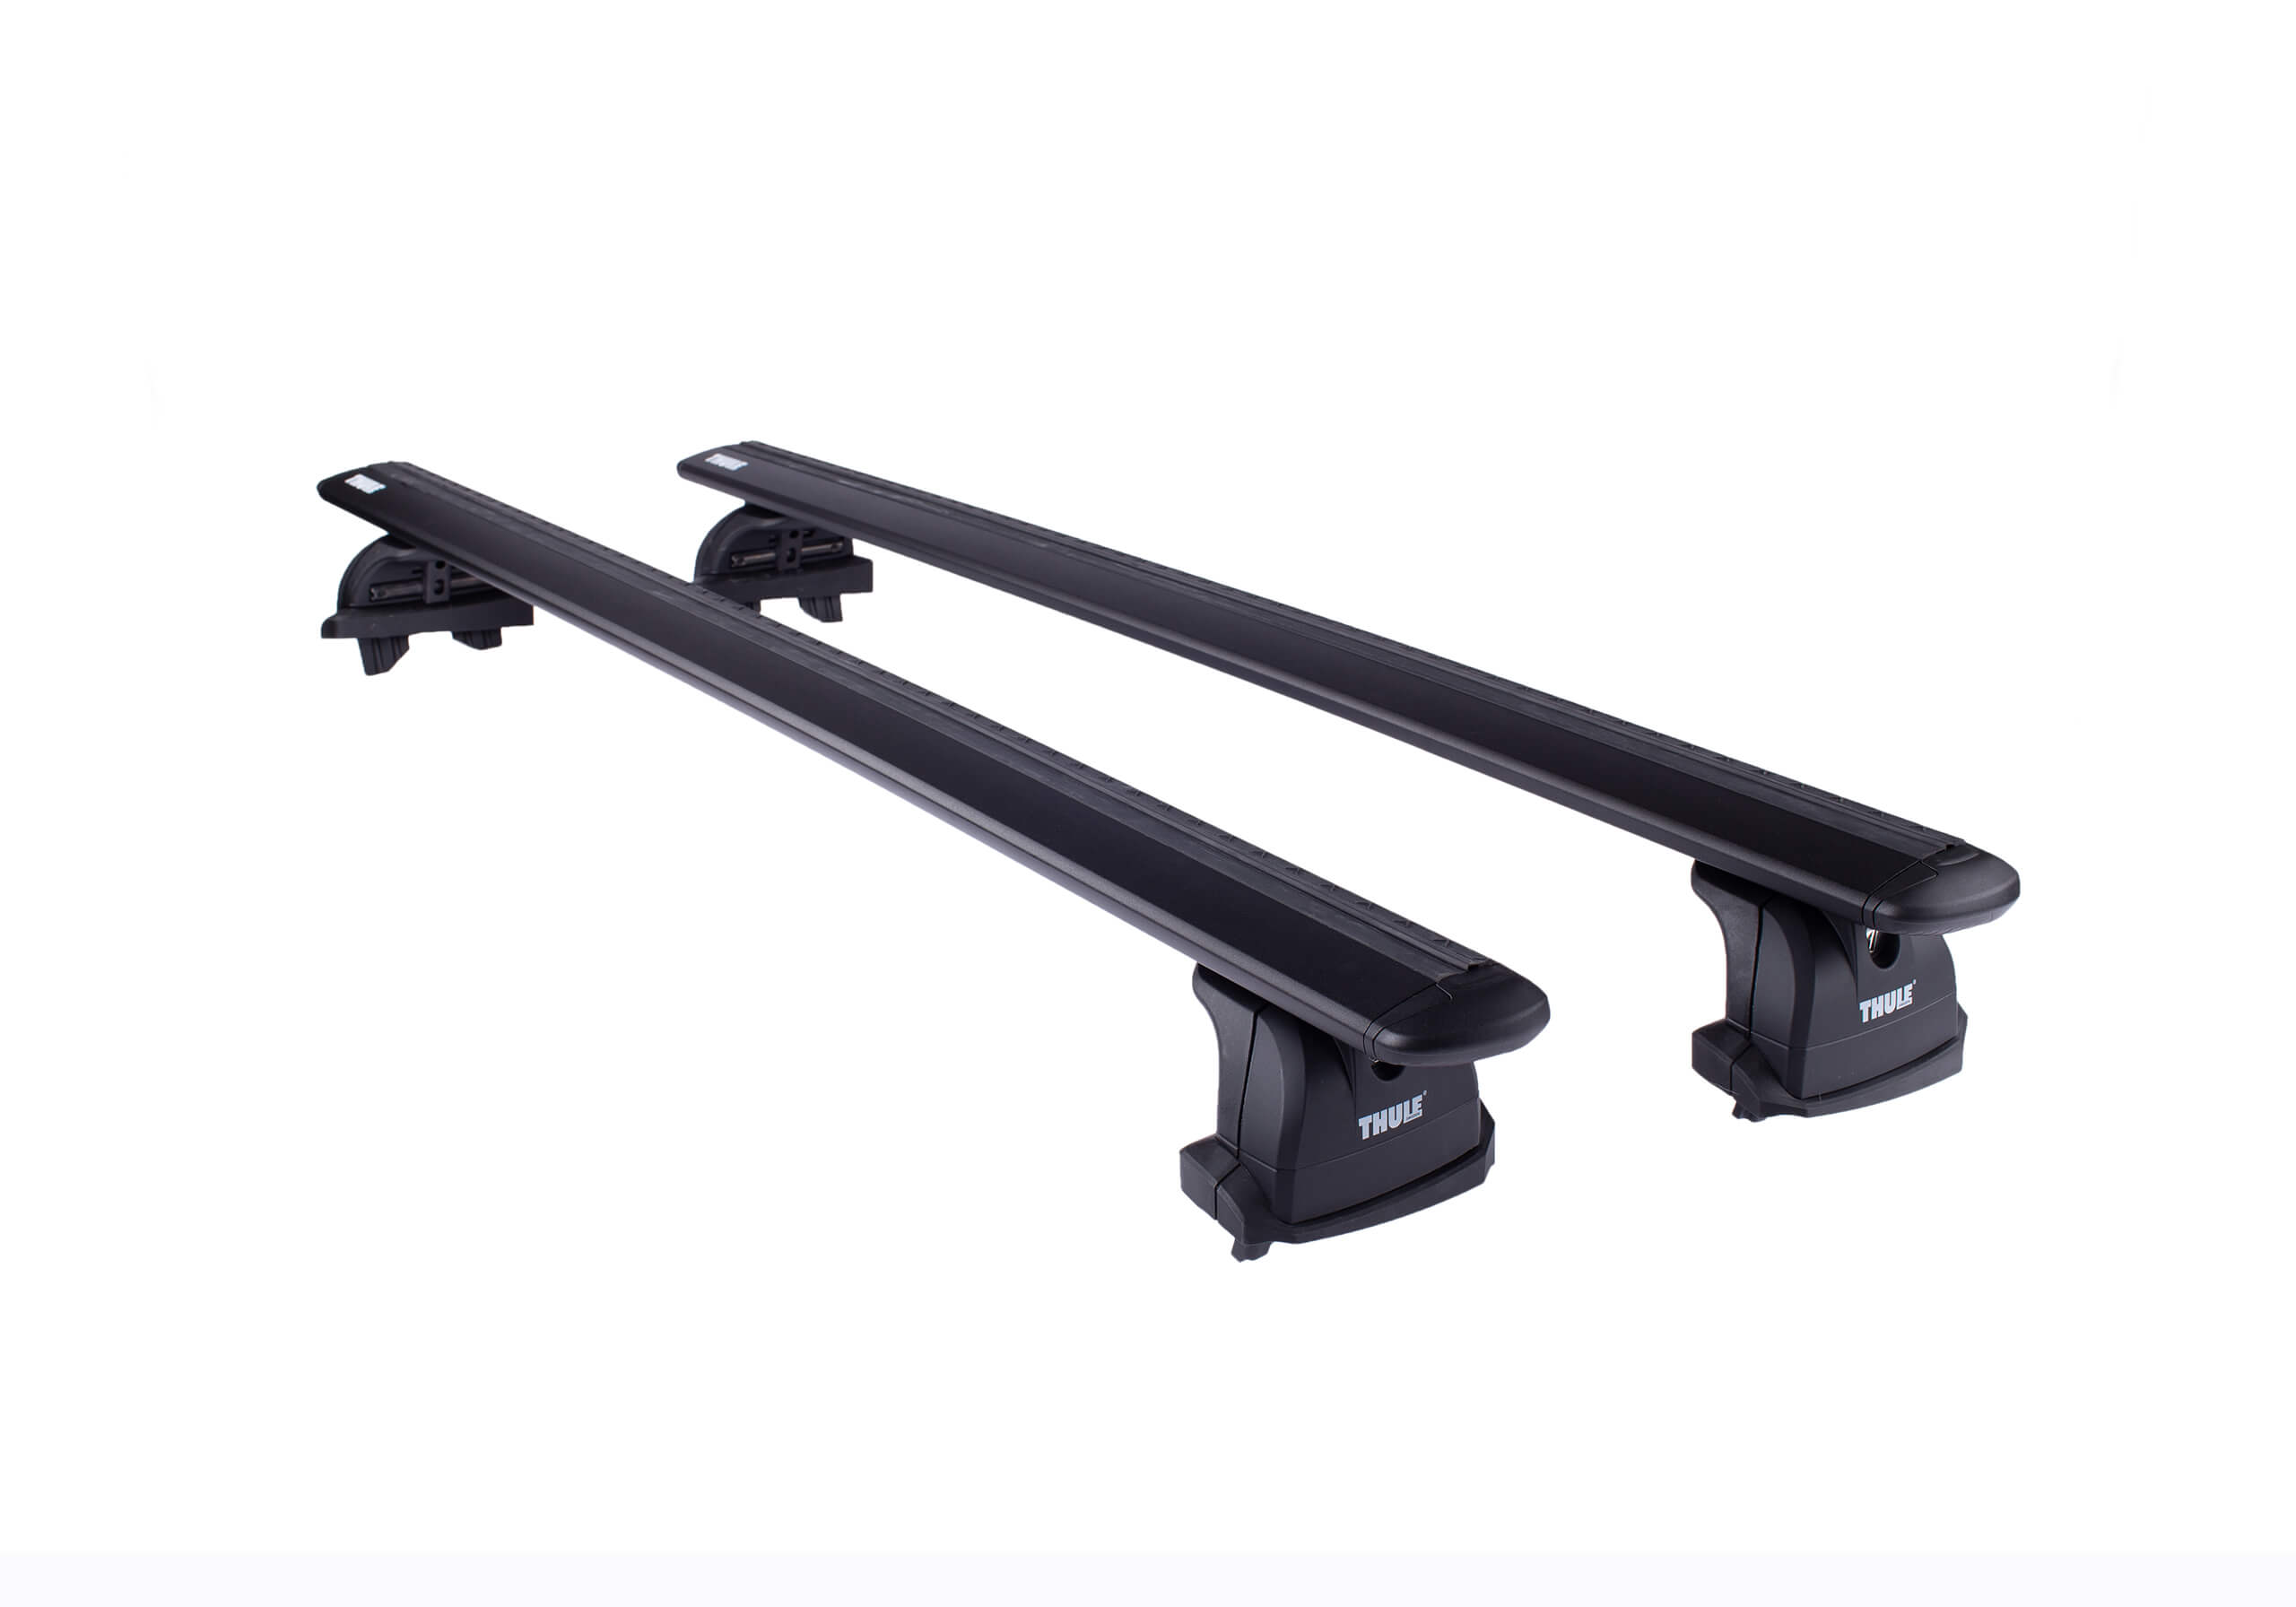 Volkswagen VW Caddy L2 (Maxi) (2011 to 2015):Thule black WingBars package - 753, 7112B, 3022